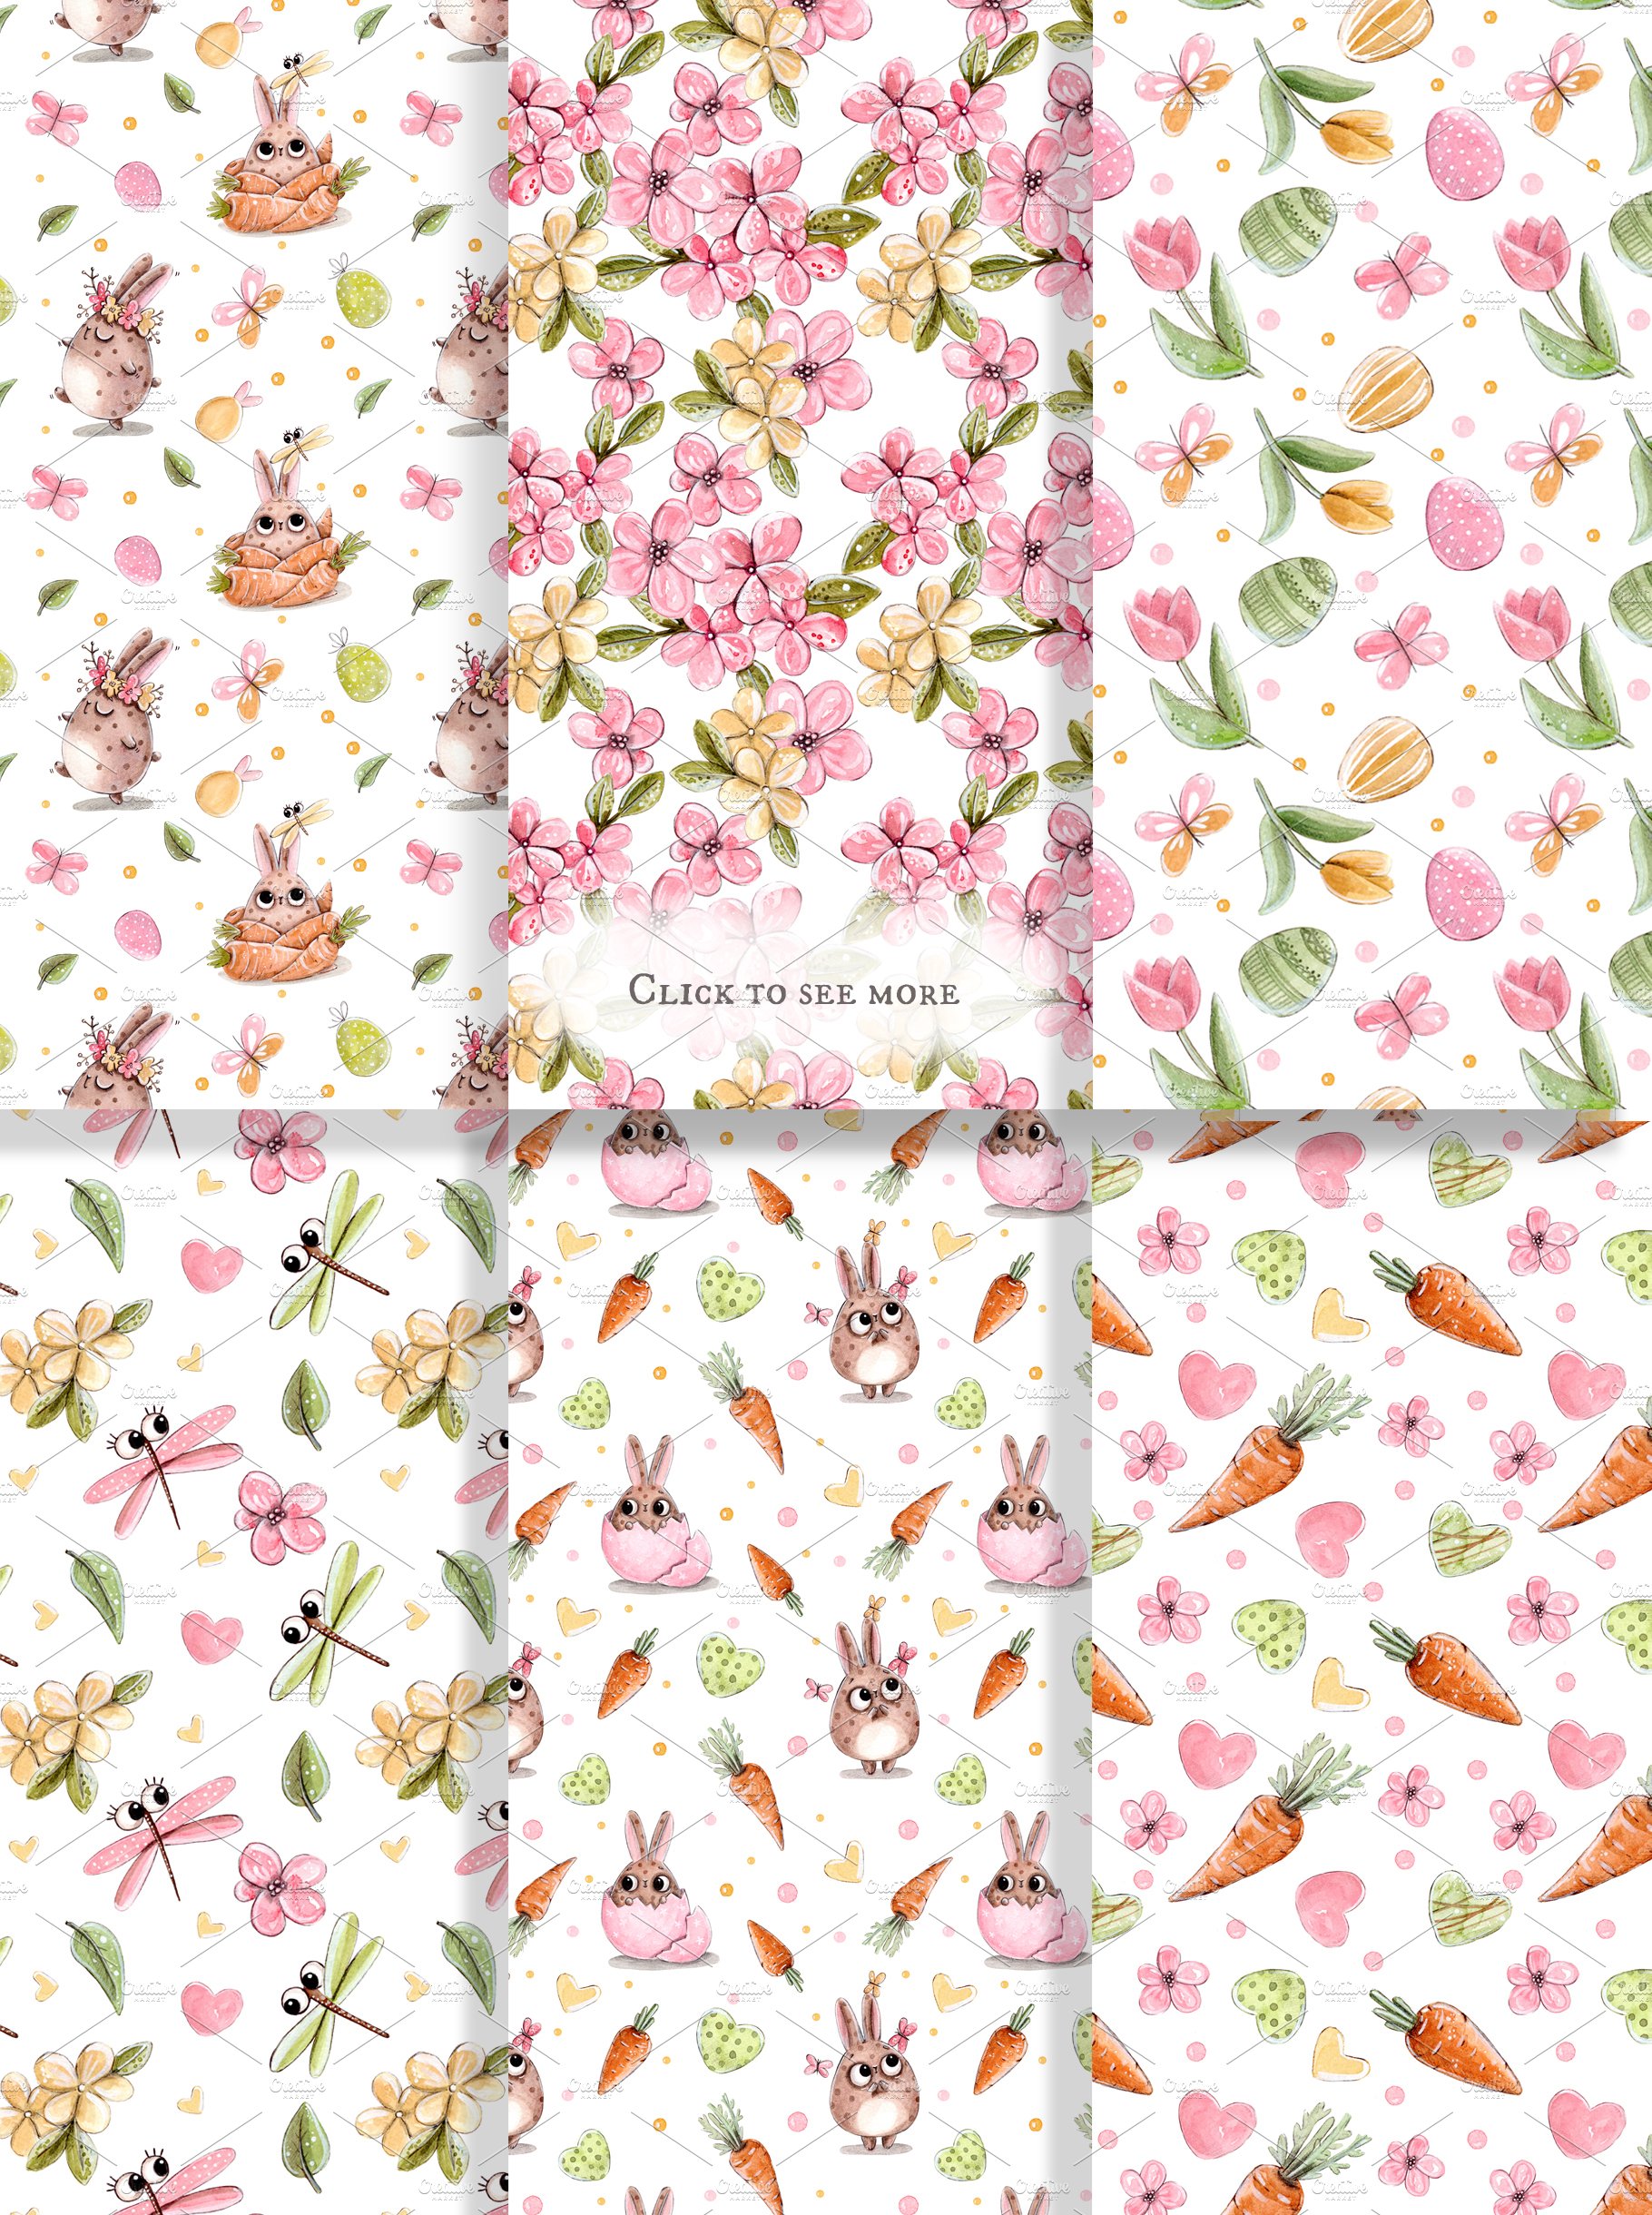 Pastel easter patterns with the small Easter prints.